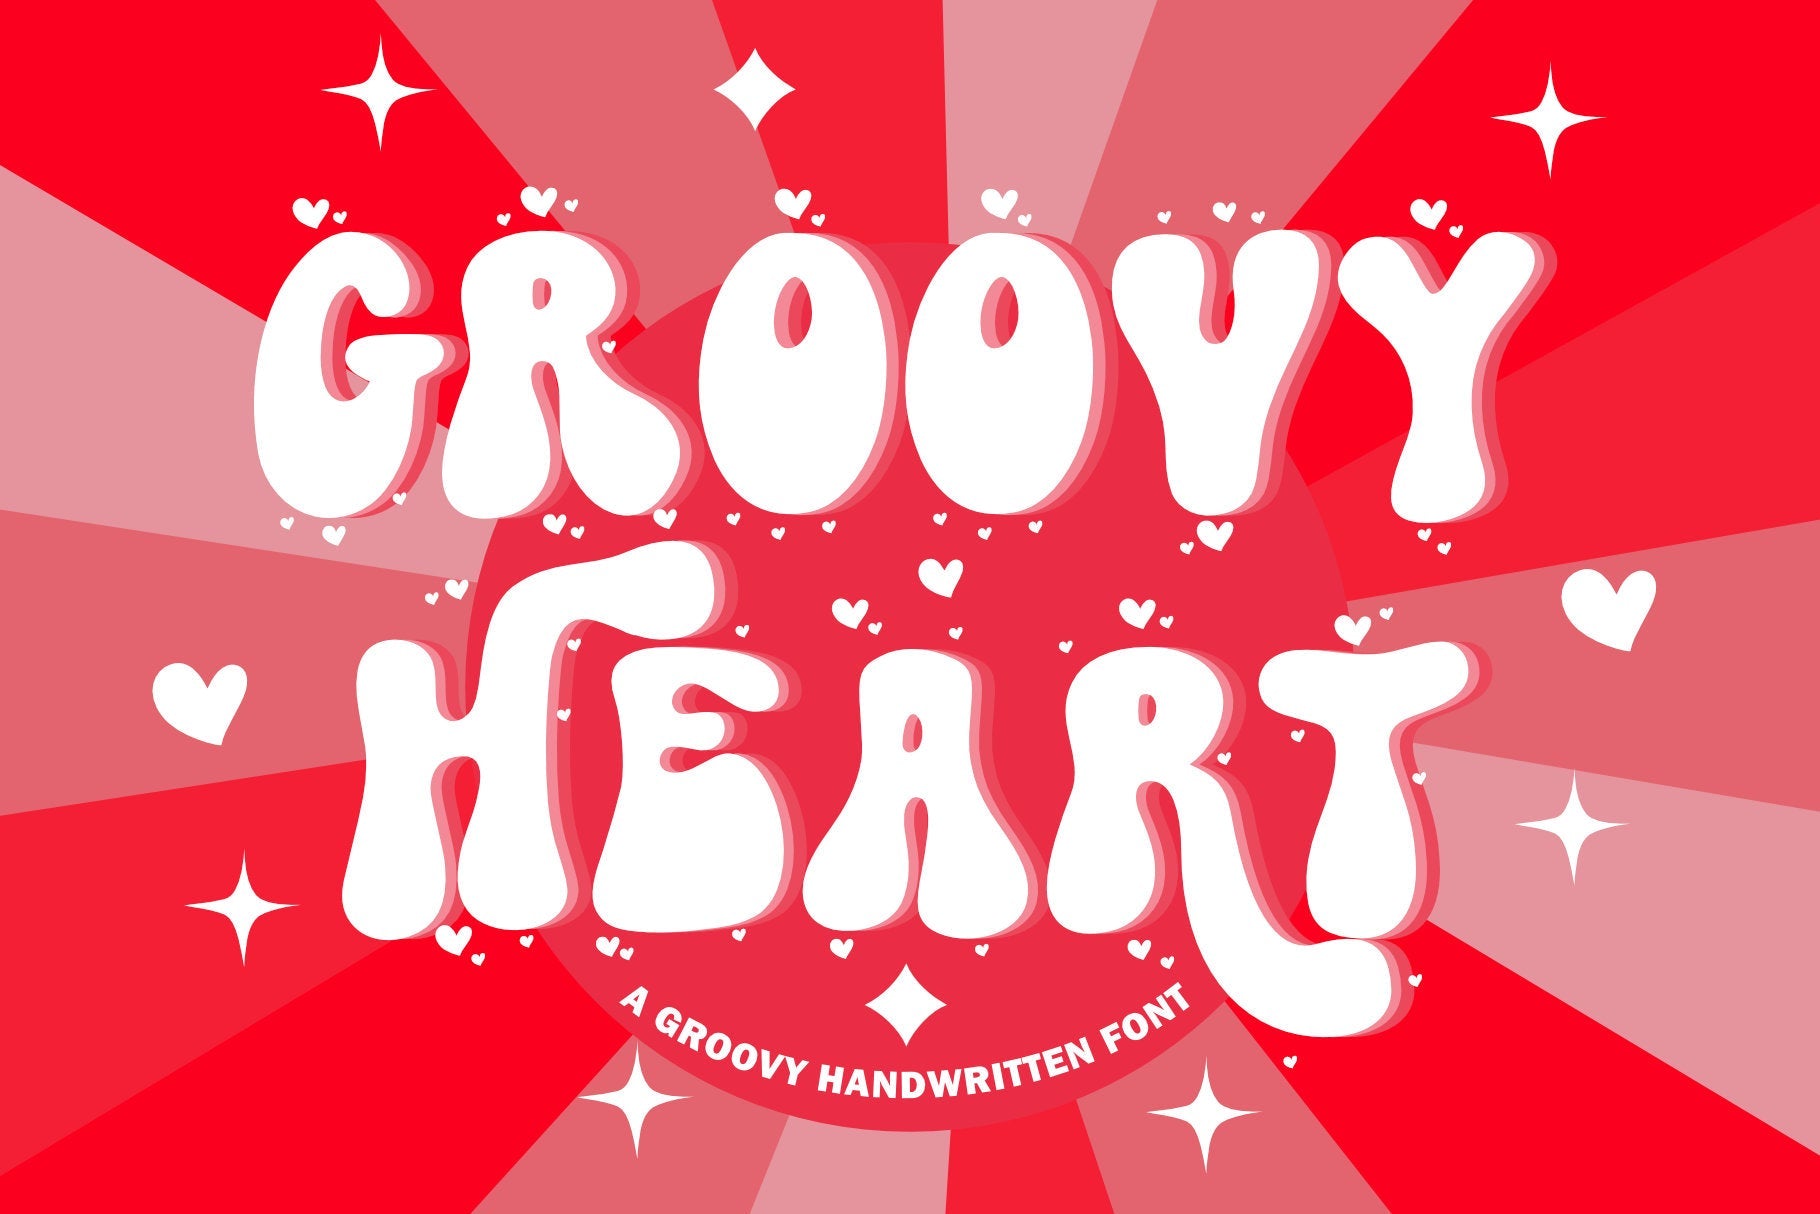 Example font Groovy Heart #1